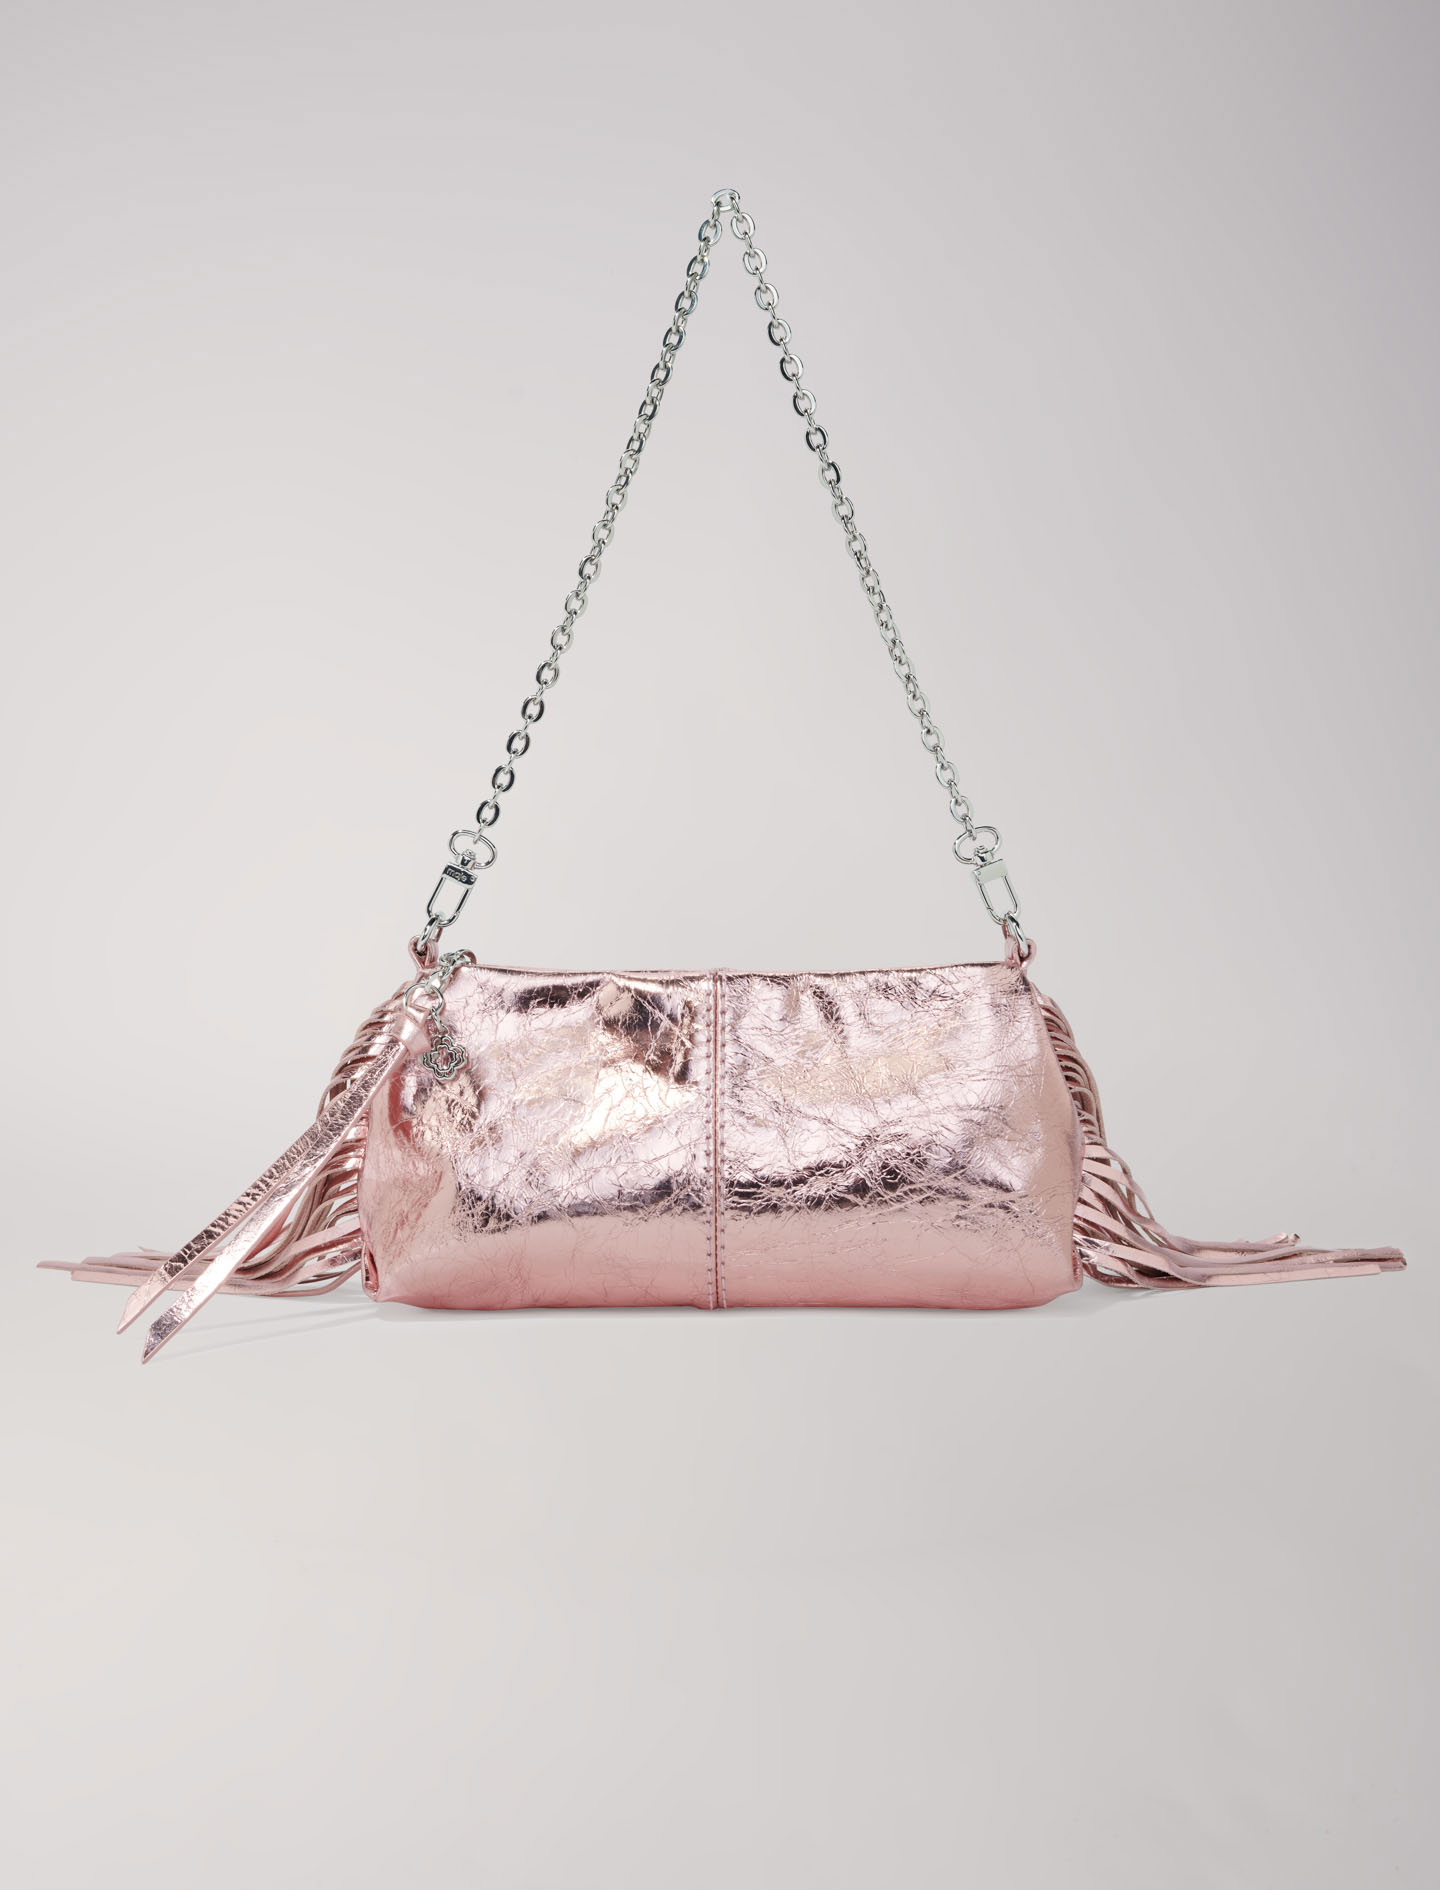 Mixte's polyester Chain: Metallic leather Miss M clutch bag, size Mixte-Small leather goods-OS (ONE SIZE), in color Metal Pink /